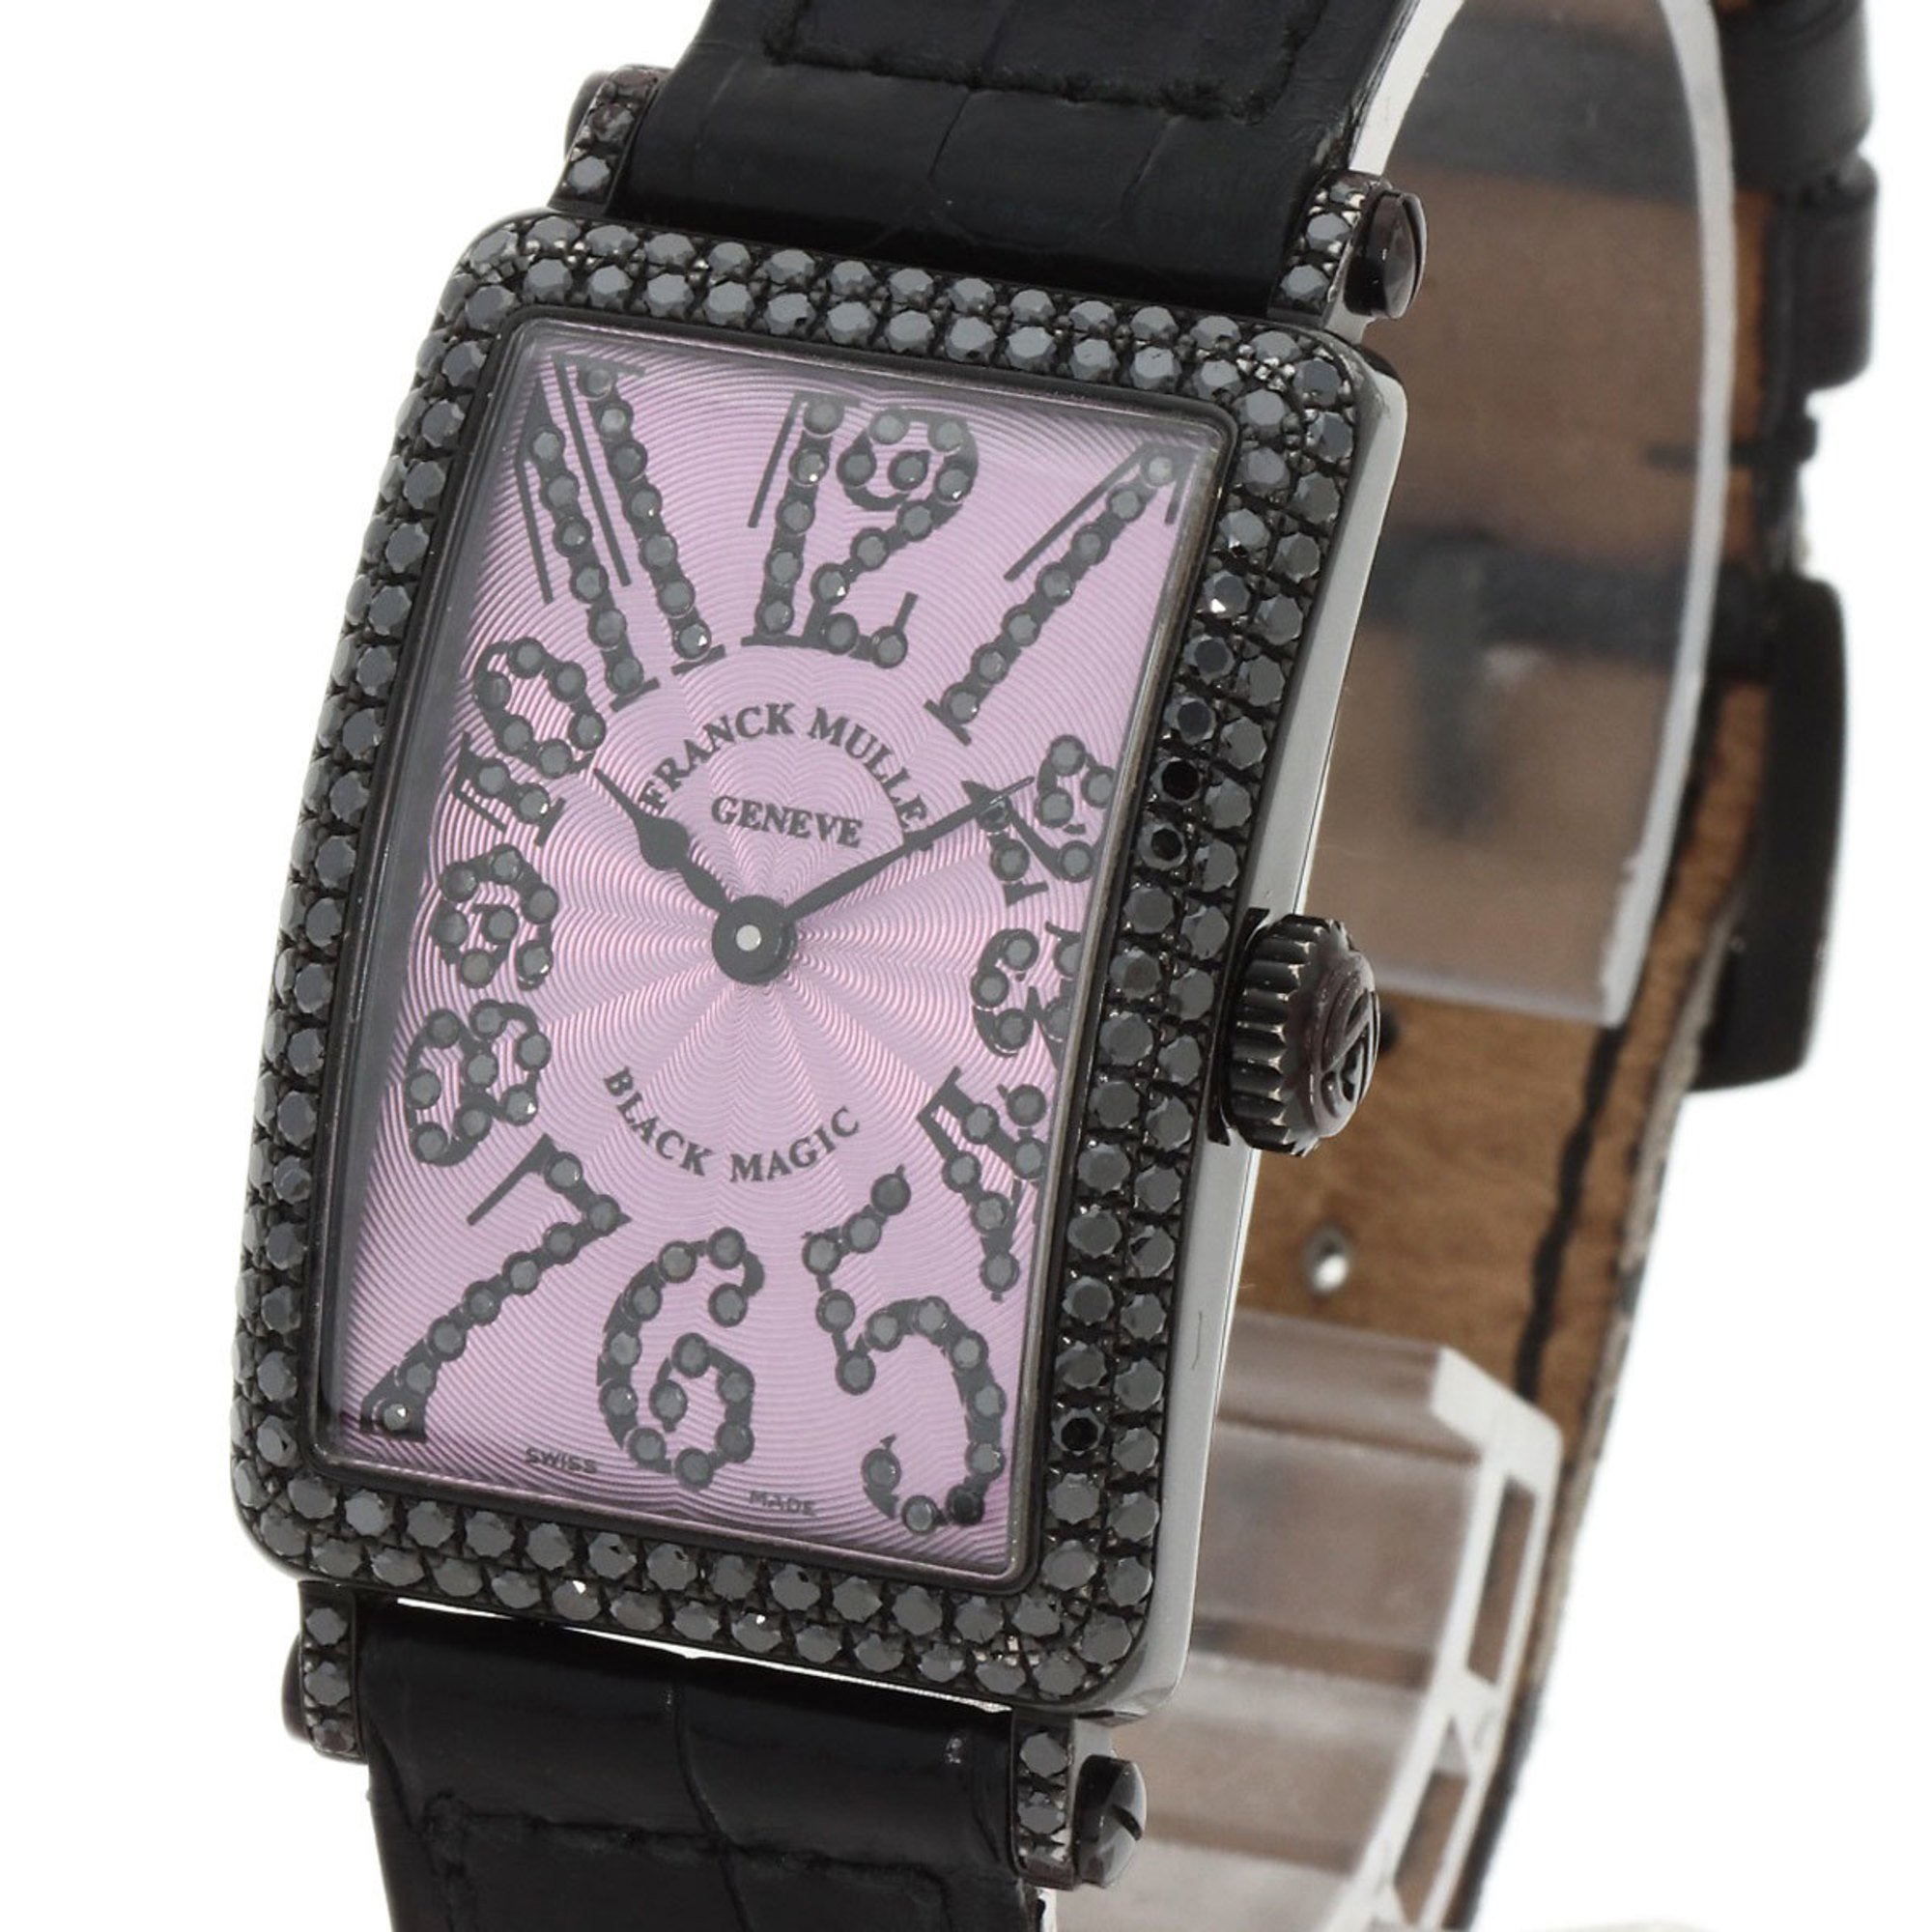 Franck Muller 902D Long Island BLACK MAGIC 400 Limited Edition Watch K18 White Gold Leather Ladies